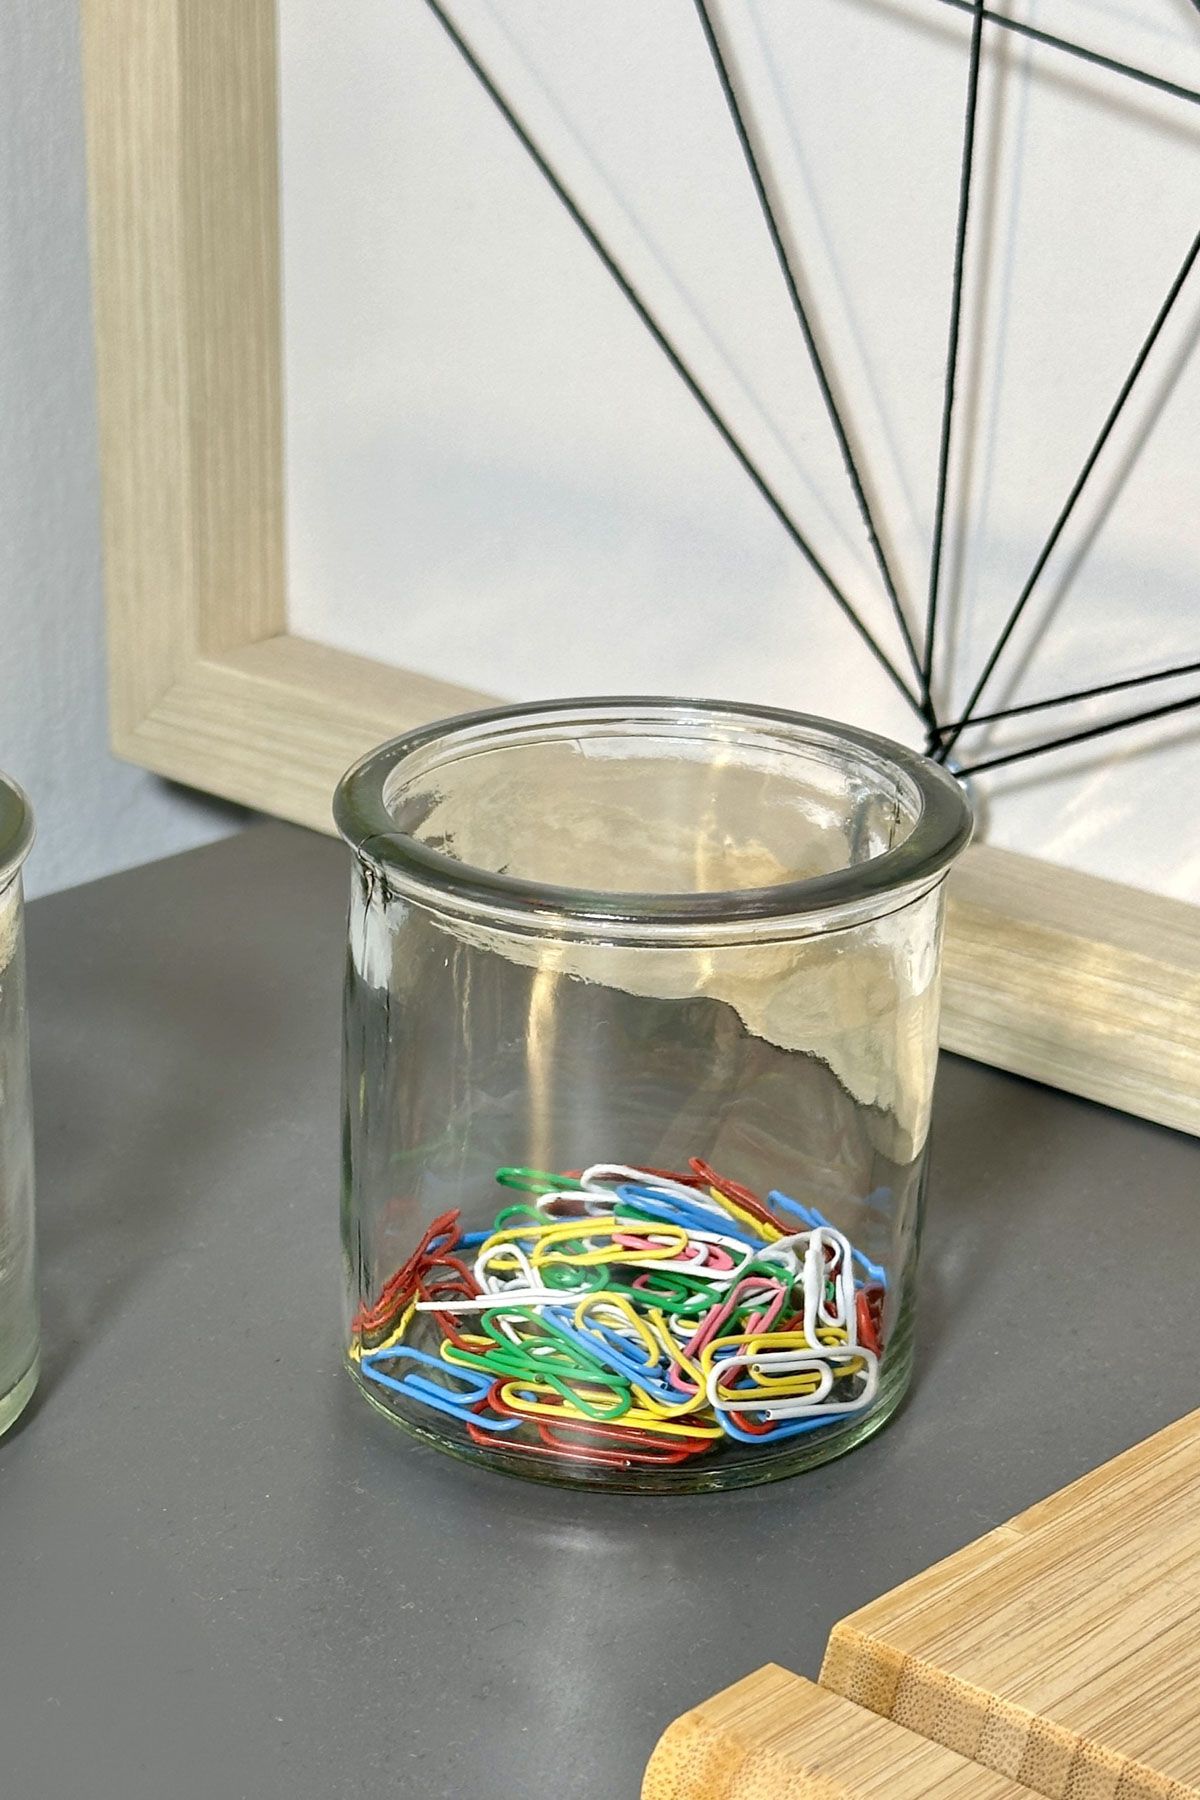 Use Glass Candle Jars To Store Small Items